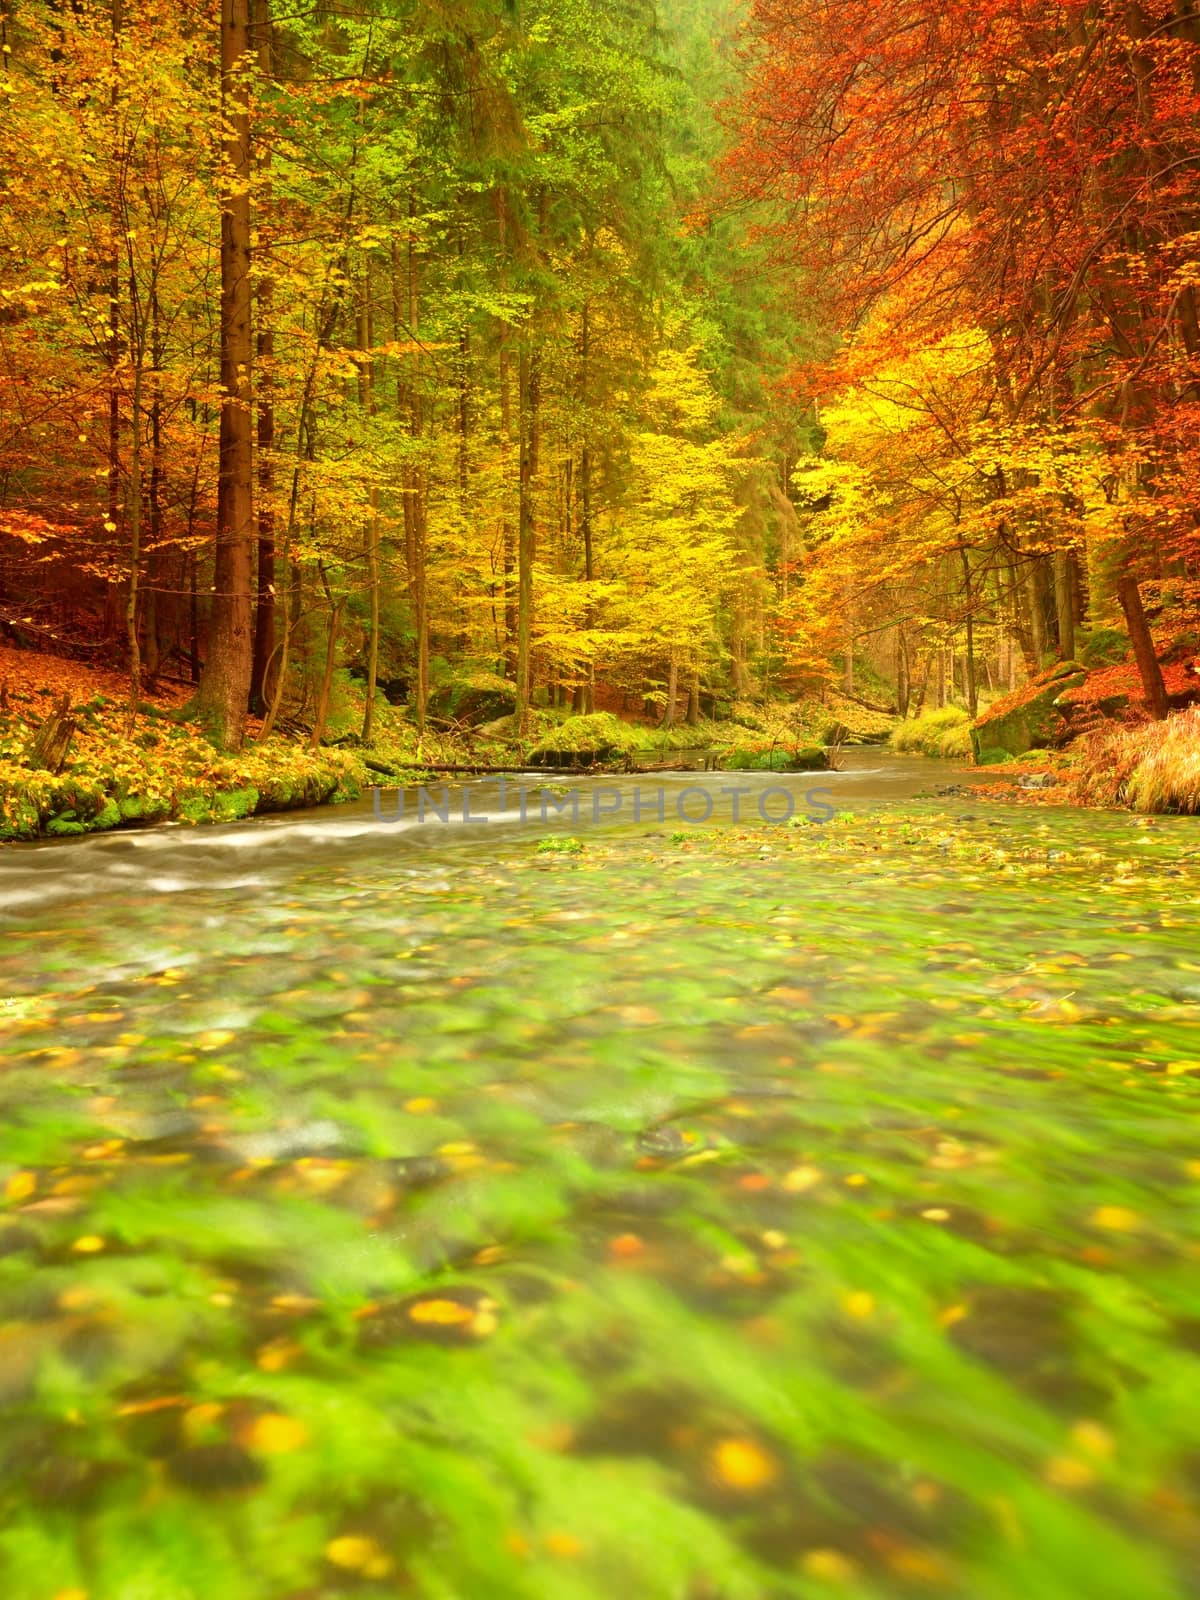 Autumn nature. Mountain river with low level of water, colorful leaves in forest . Mossy and boulders on river bank, green fern, fresh green leaves on trees.